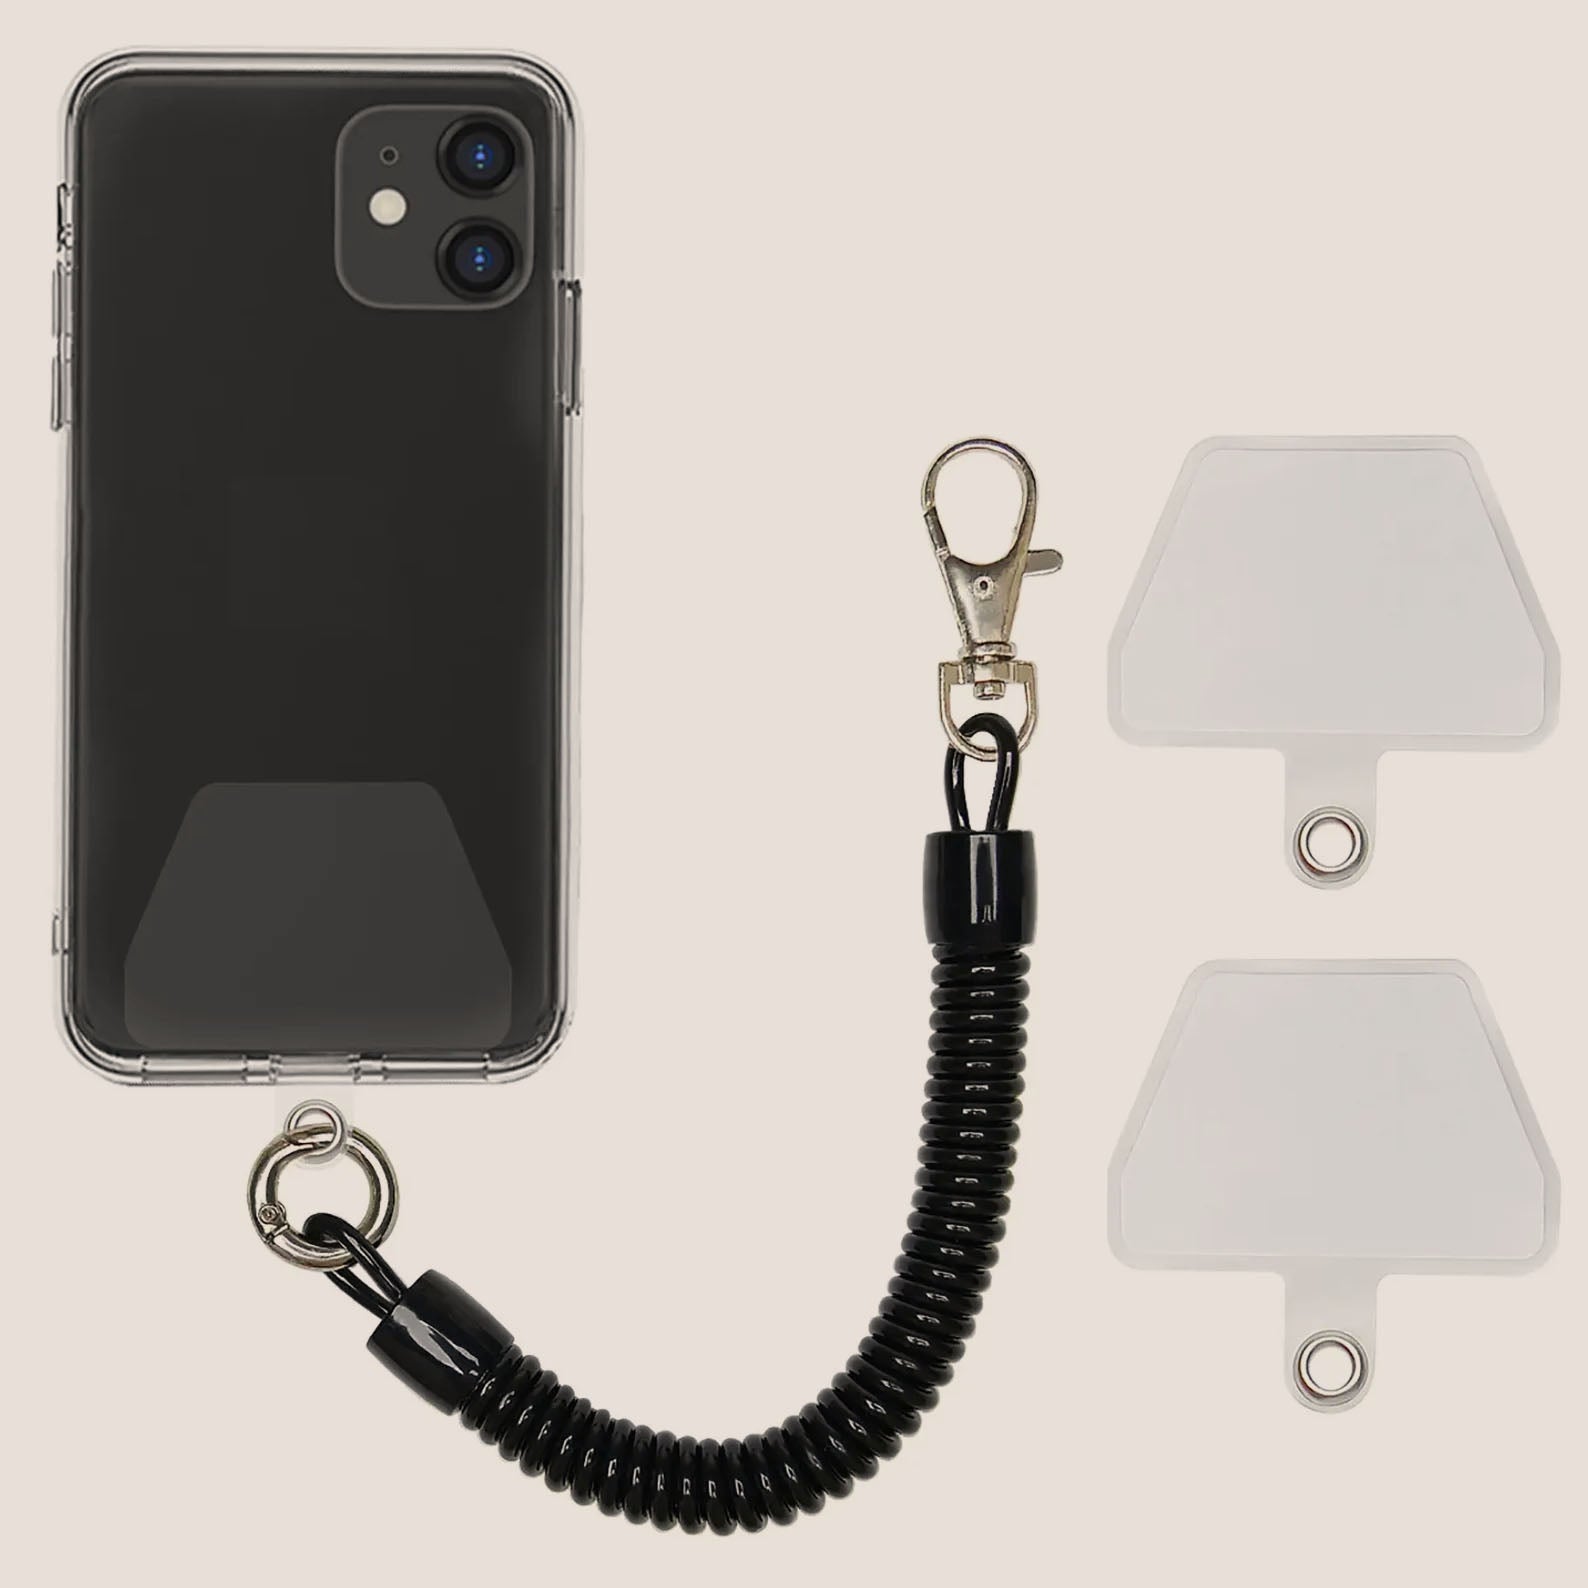 "Dude, Don't Drop Your Phone!" Set of (2) Mobile Phone Anchors Portable and pocket sized mobile phone accessory as everyday carry during DIY projects, camping, backpacking, glamping or hiking! all included in kit